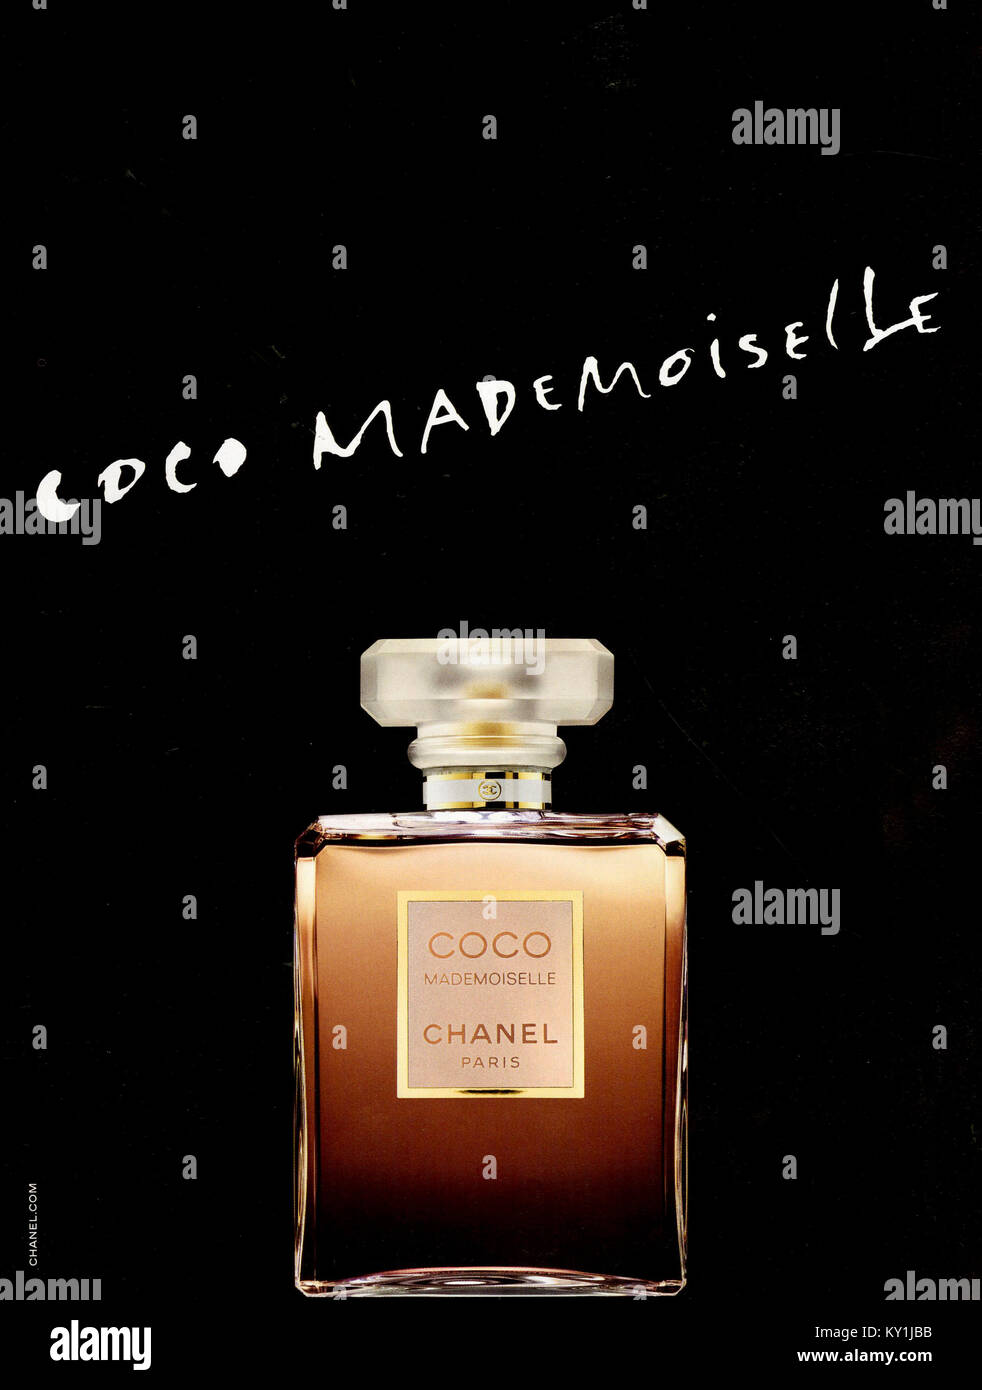 Chanel Coco Mademoiselle L'Eau Privée Campaign starring Keira Knightley